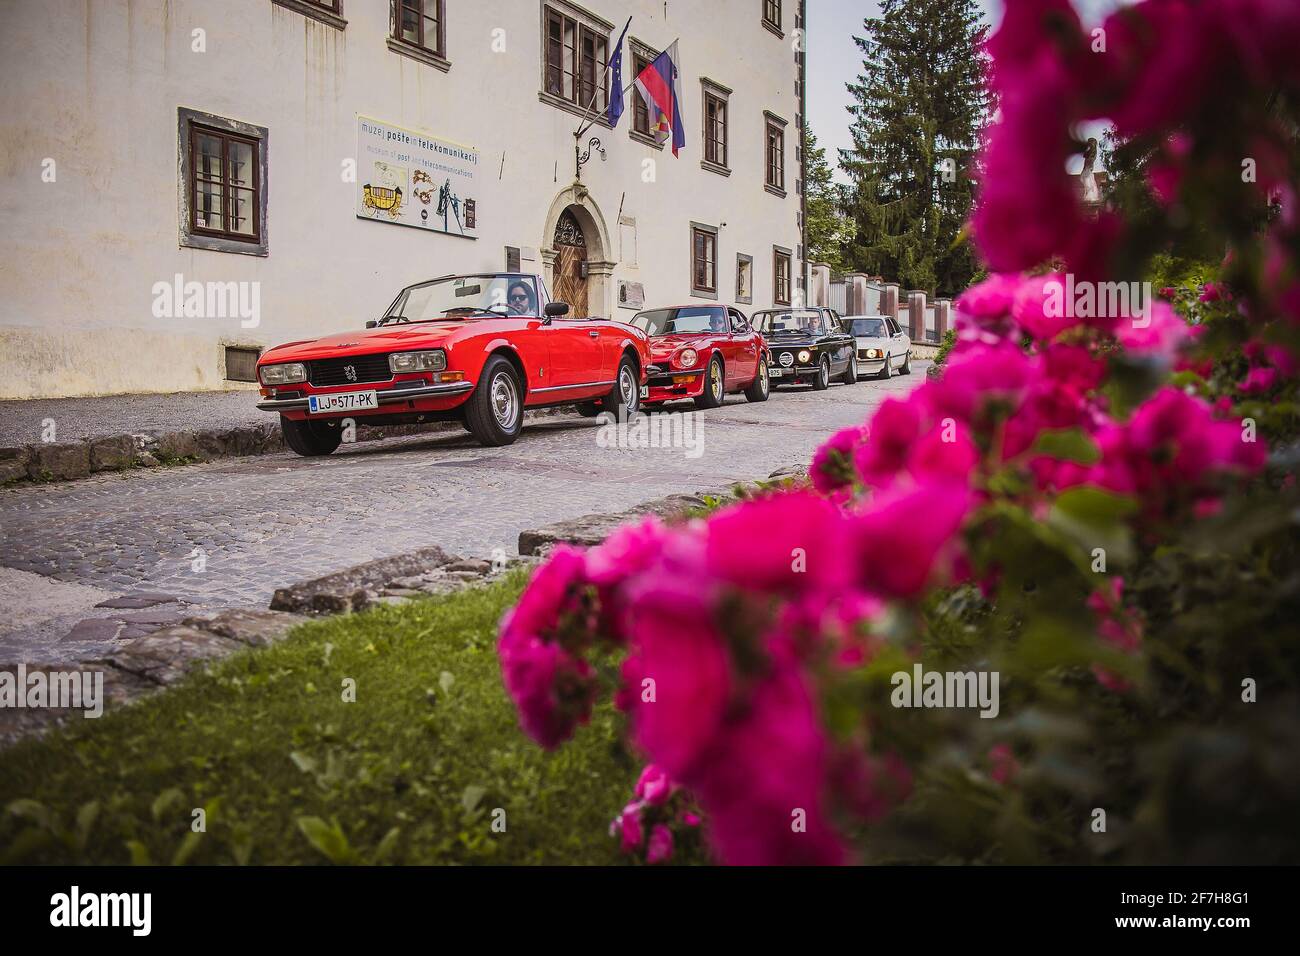 Polhov Gradec, Slovenia, 25.6.2019: A group of old vintage cars, including Datsun 240Z, Opel Manta B, Peugeot 504 and Bmw E21 325 and 2002 tii, on a d Stock Photo